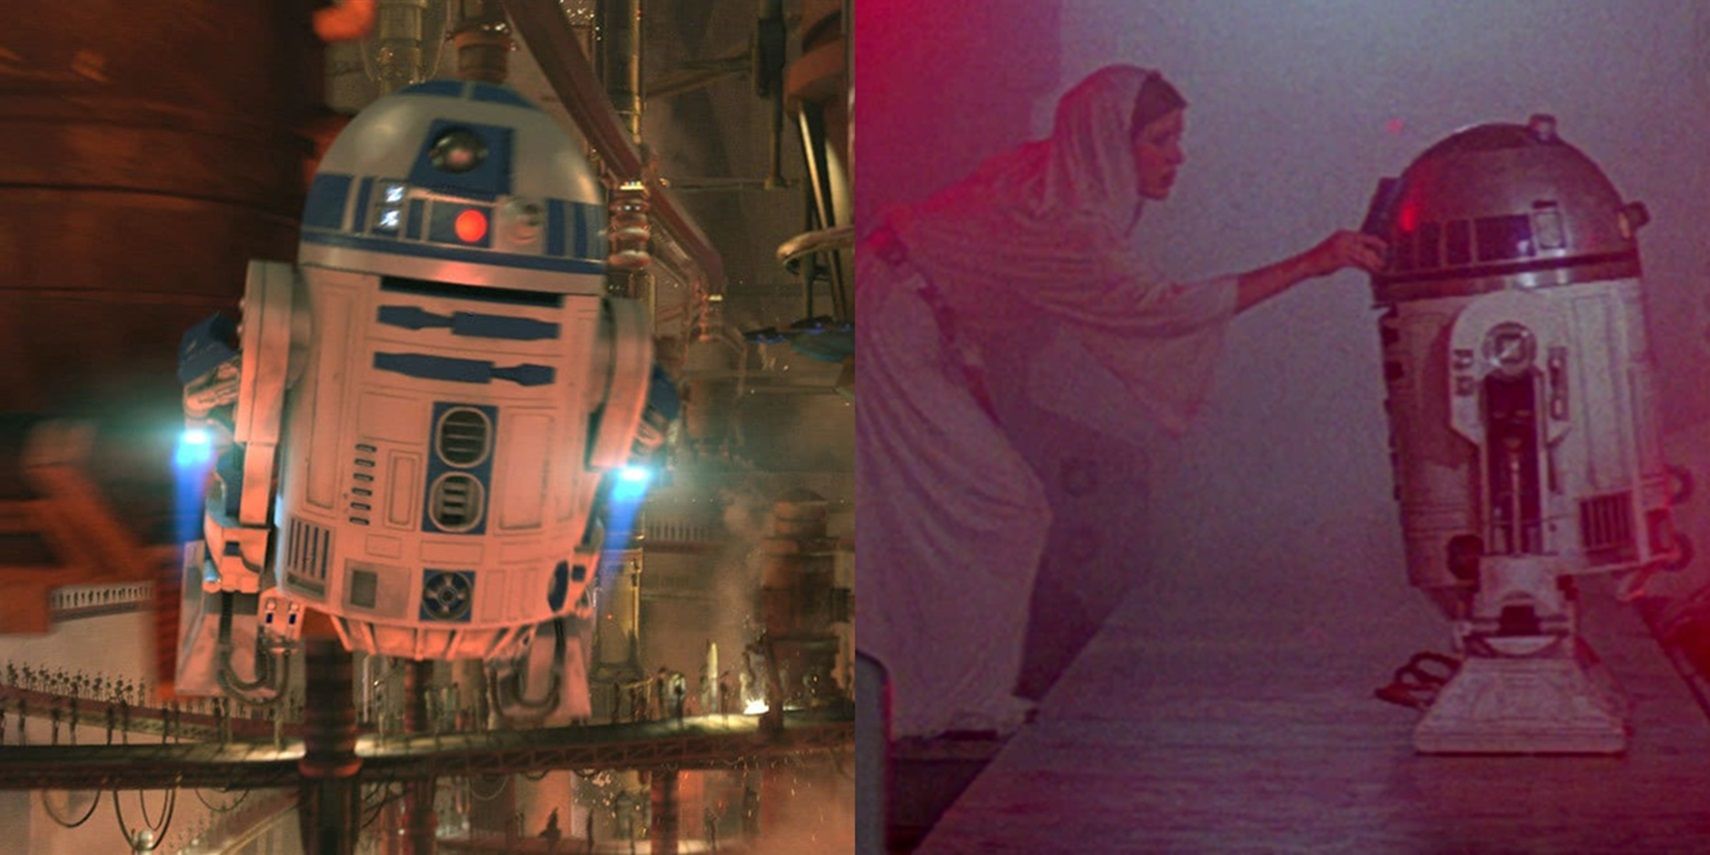 R2-D2 flying in a droid factory and Leia recording a message in Star Wars